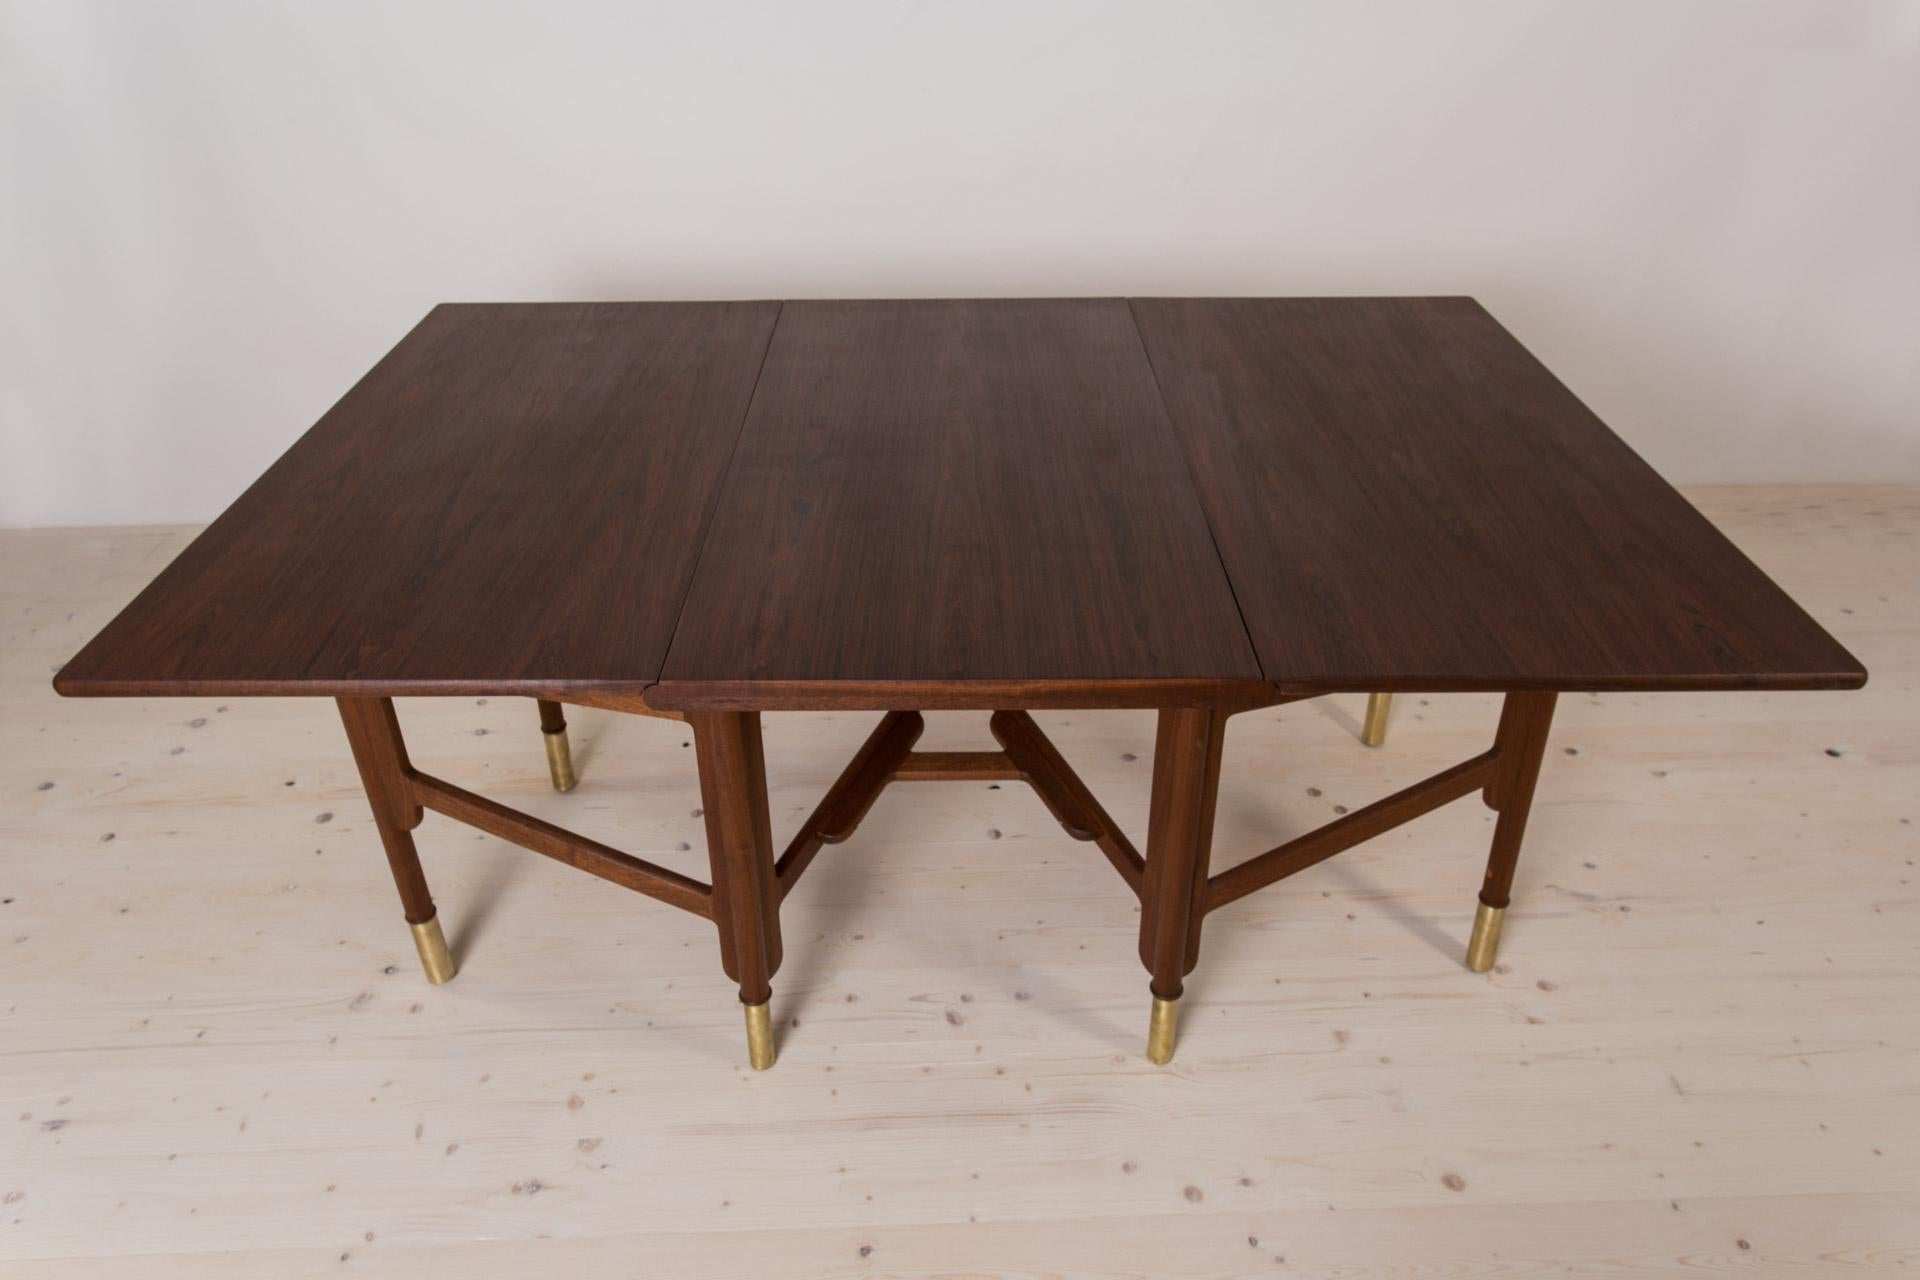 Oiled Midcentury Dining Table, Teak Wood, Brass Elements, Norway, 1950s For Sale